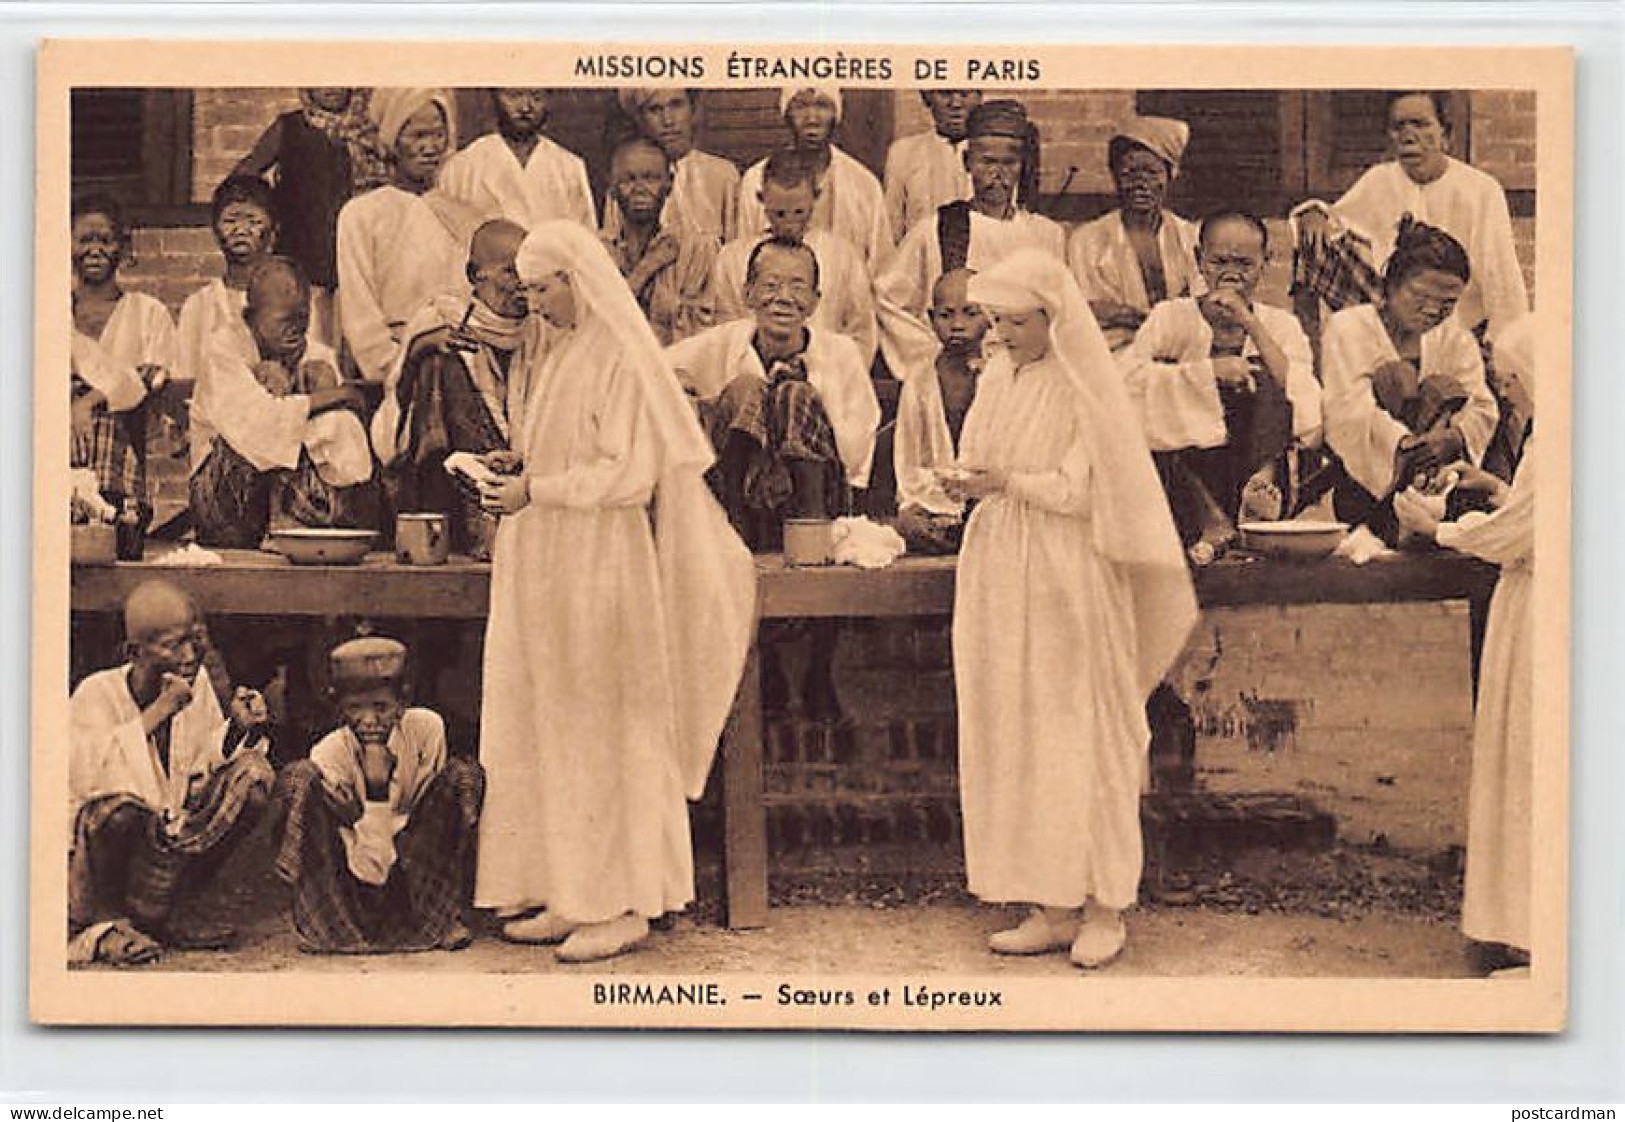 MYANMAR Burma - Sisters And Lepers - Publ. Foreign Missions Of Paris, France  - Myanmar (Burma)